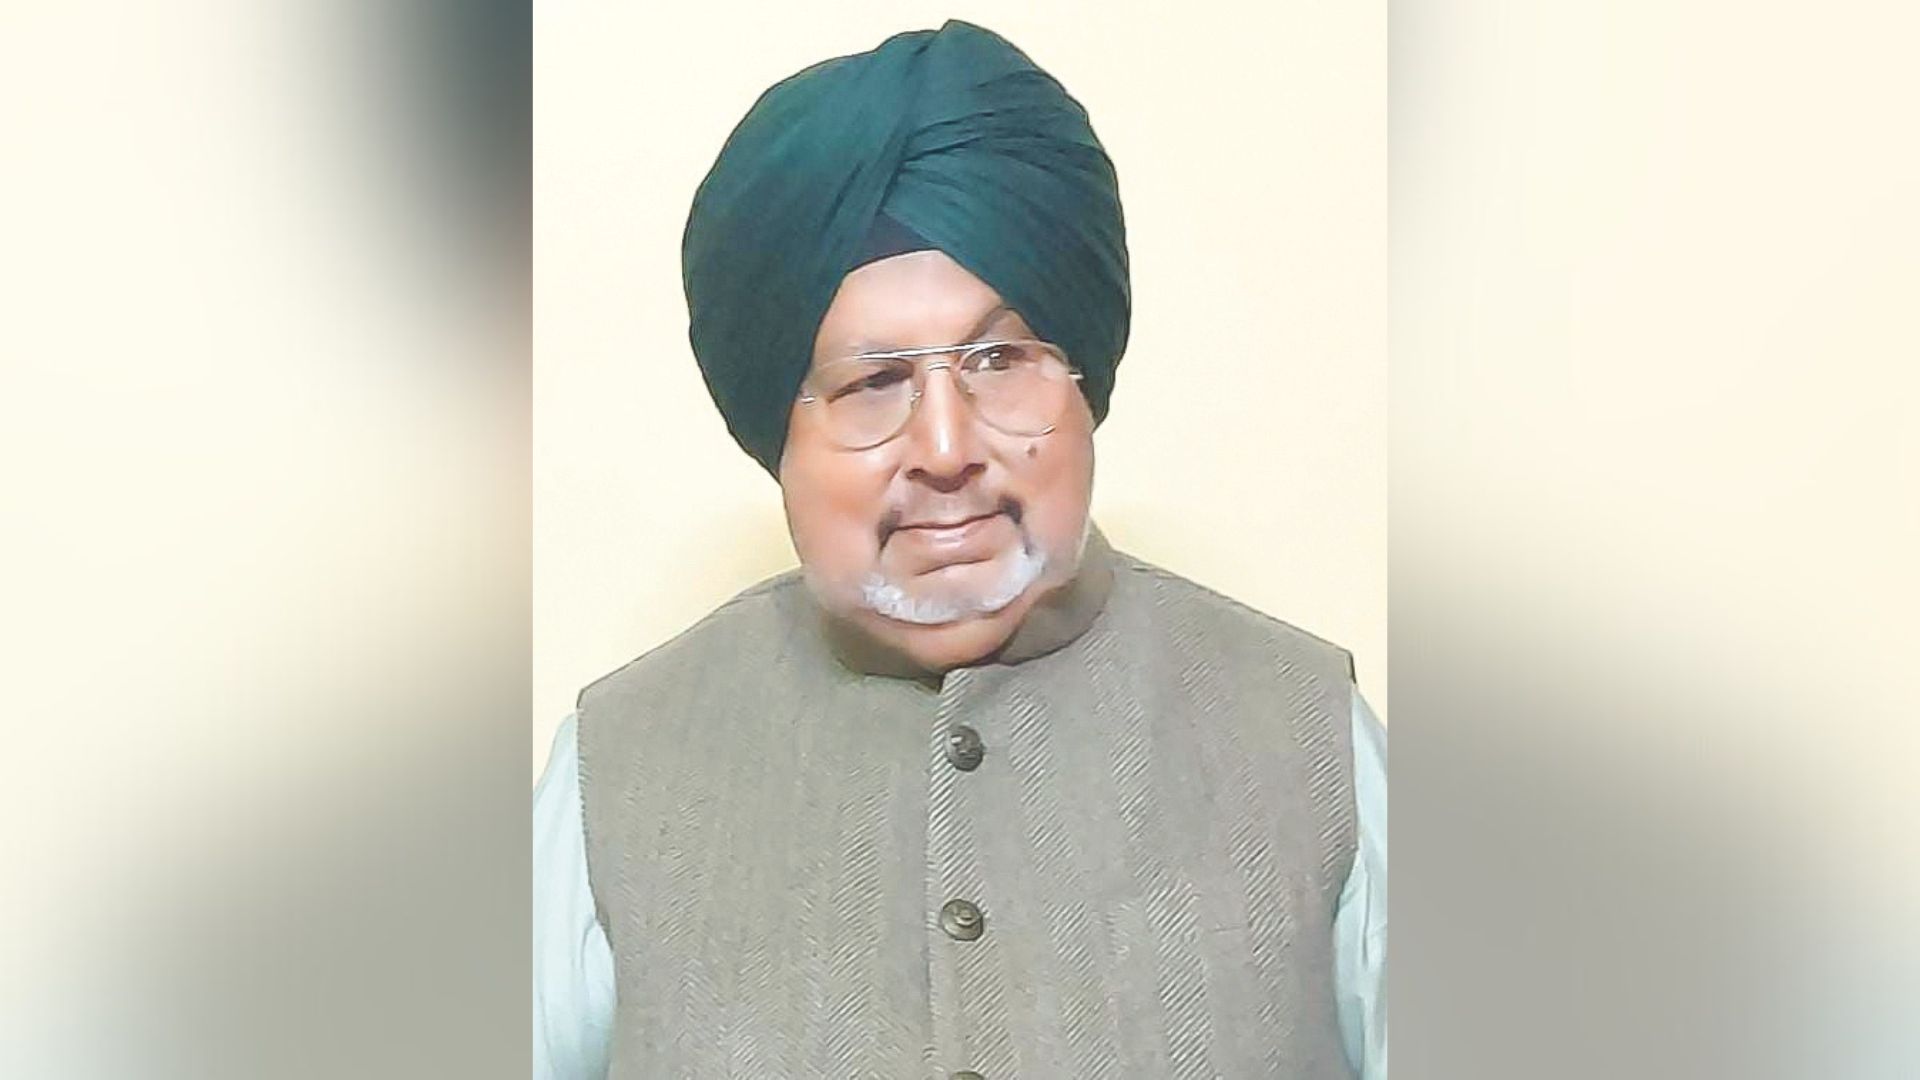 Jasvir Singh Garhi, the BSP’s chief in Punjab, emphasized Singh’s extensive involvement with the party, noting his current role as the general secretary of the BSP’s state unit.